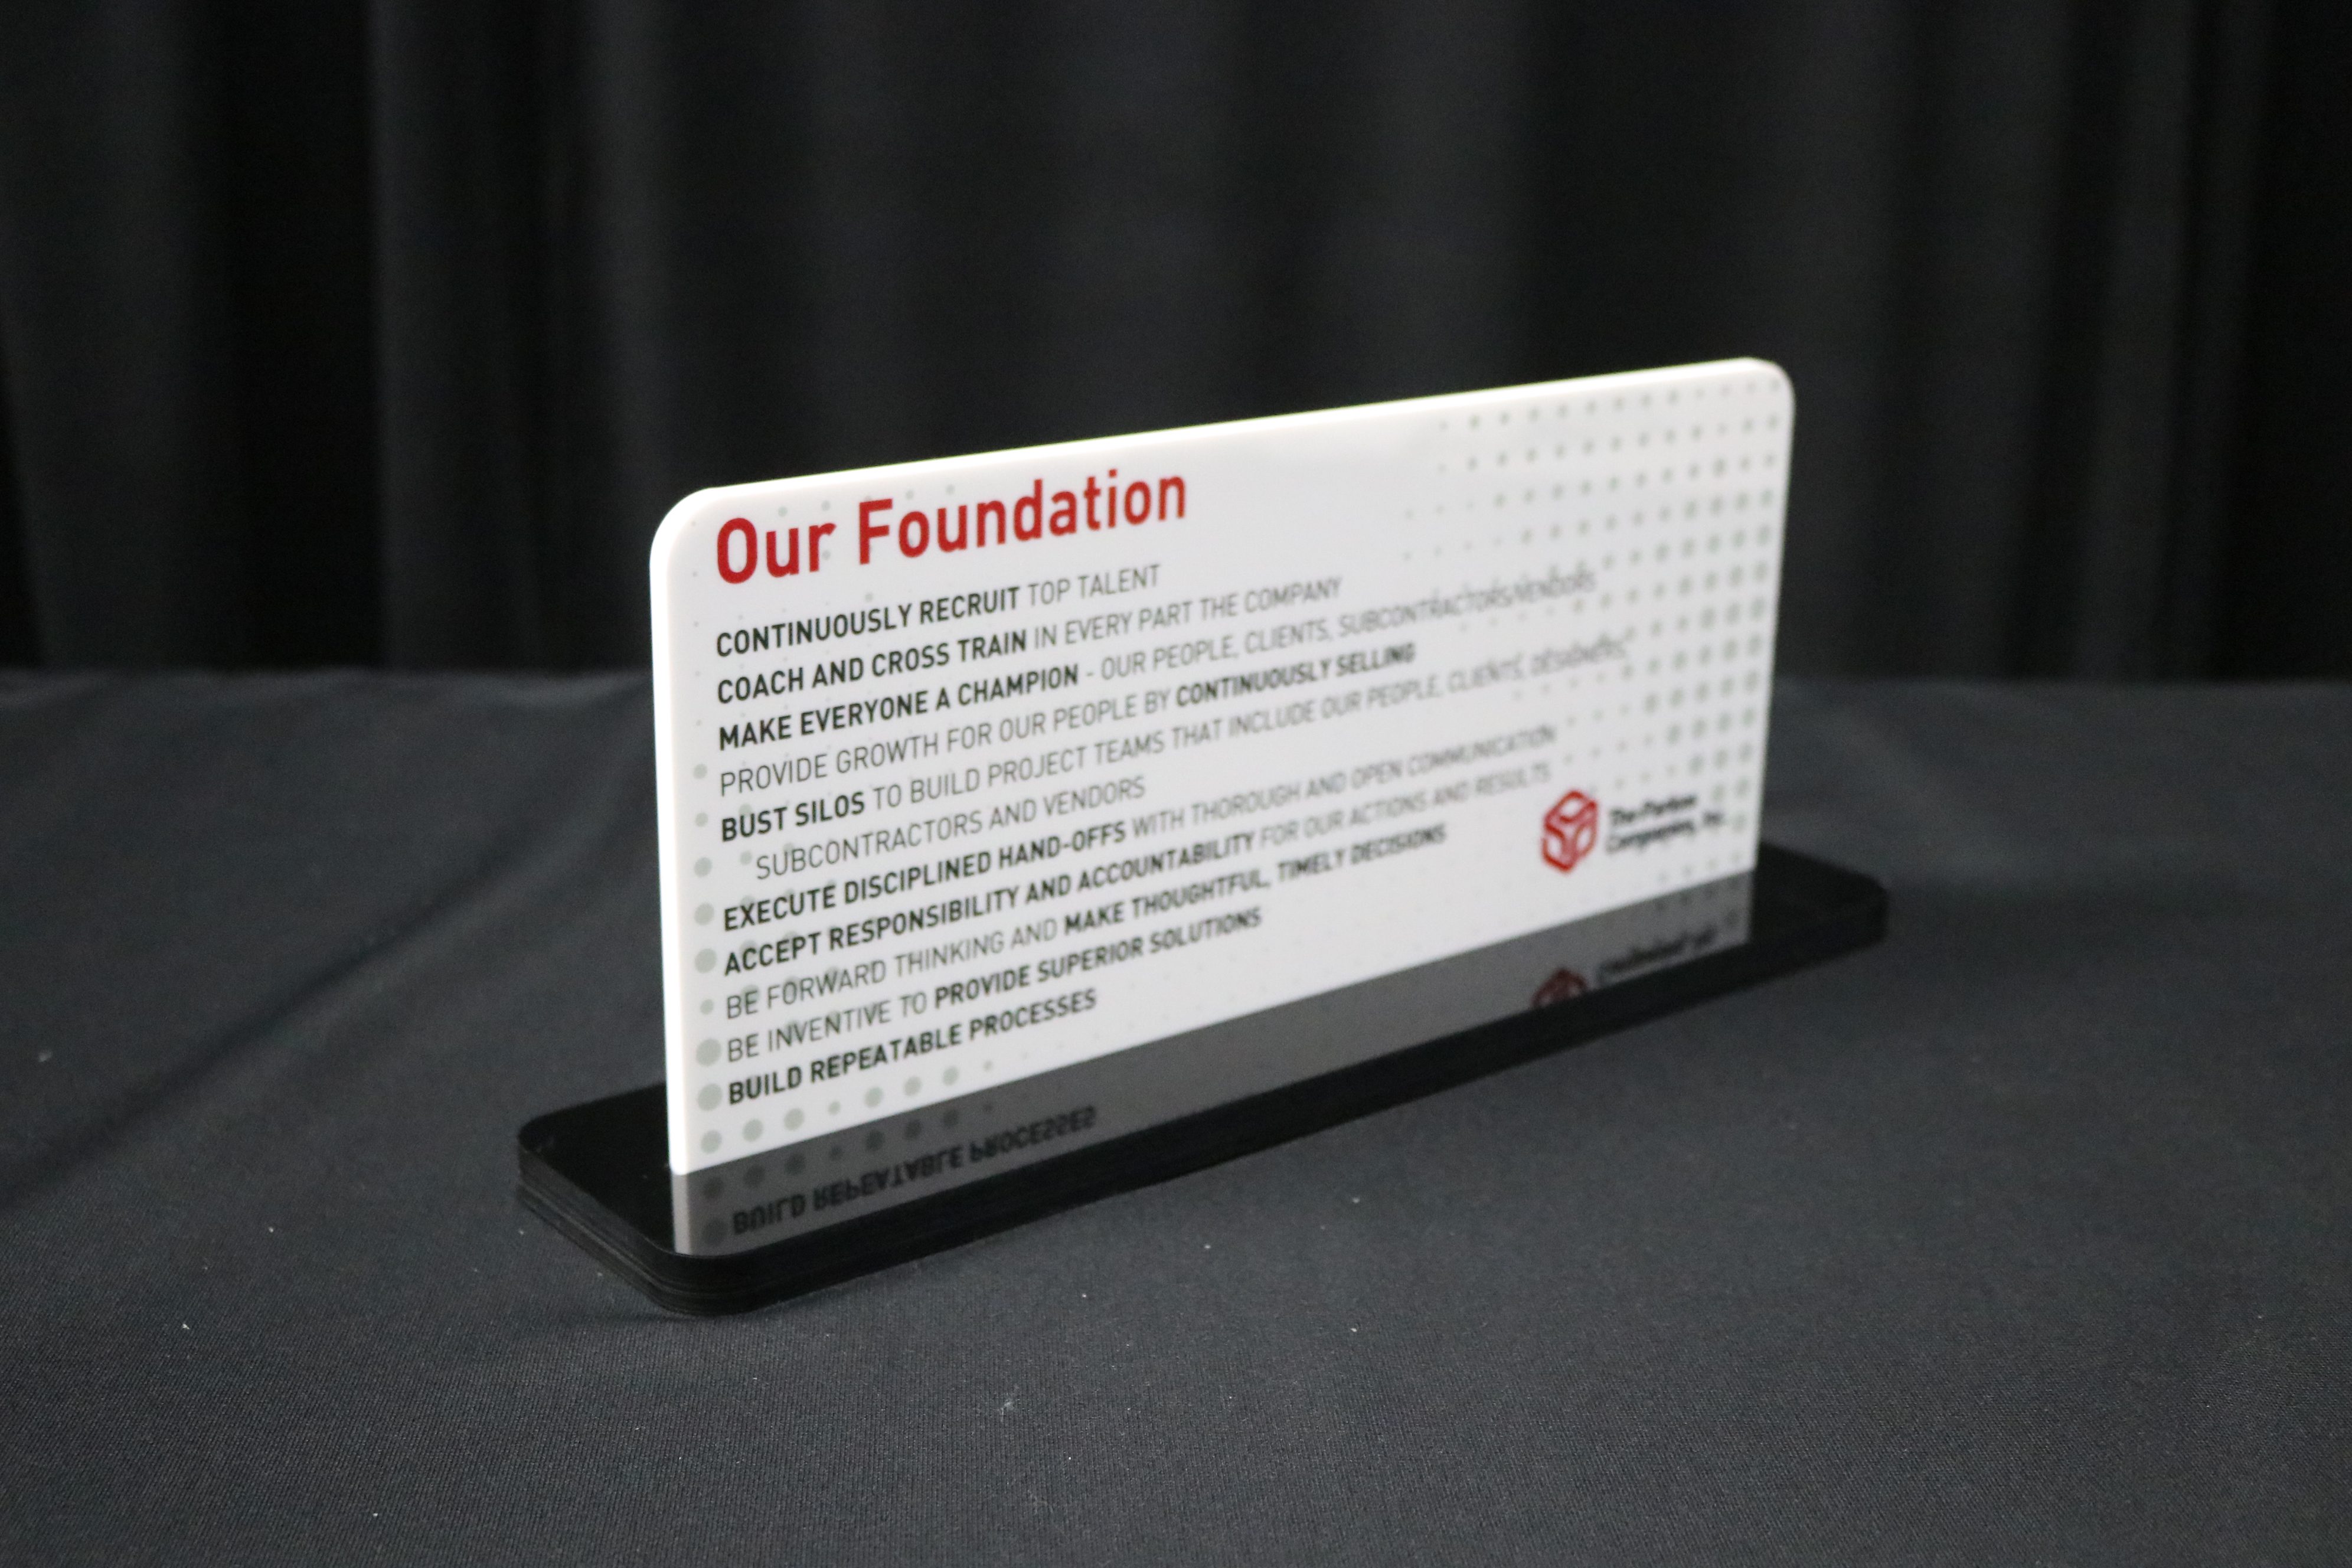 Printing of company values on white acrylic in a black acrylic base